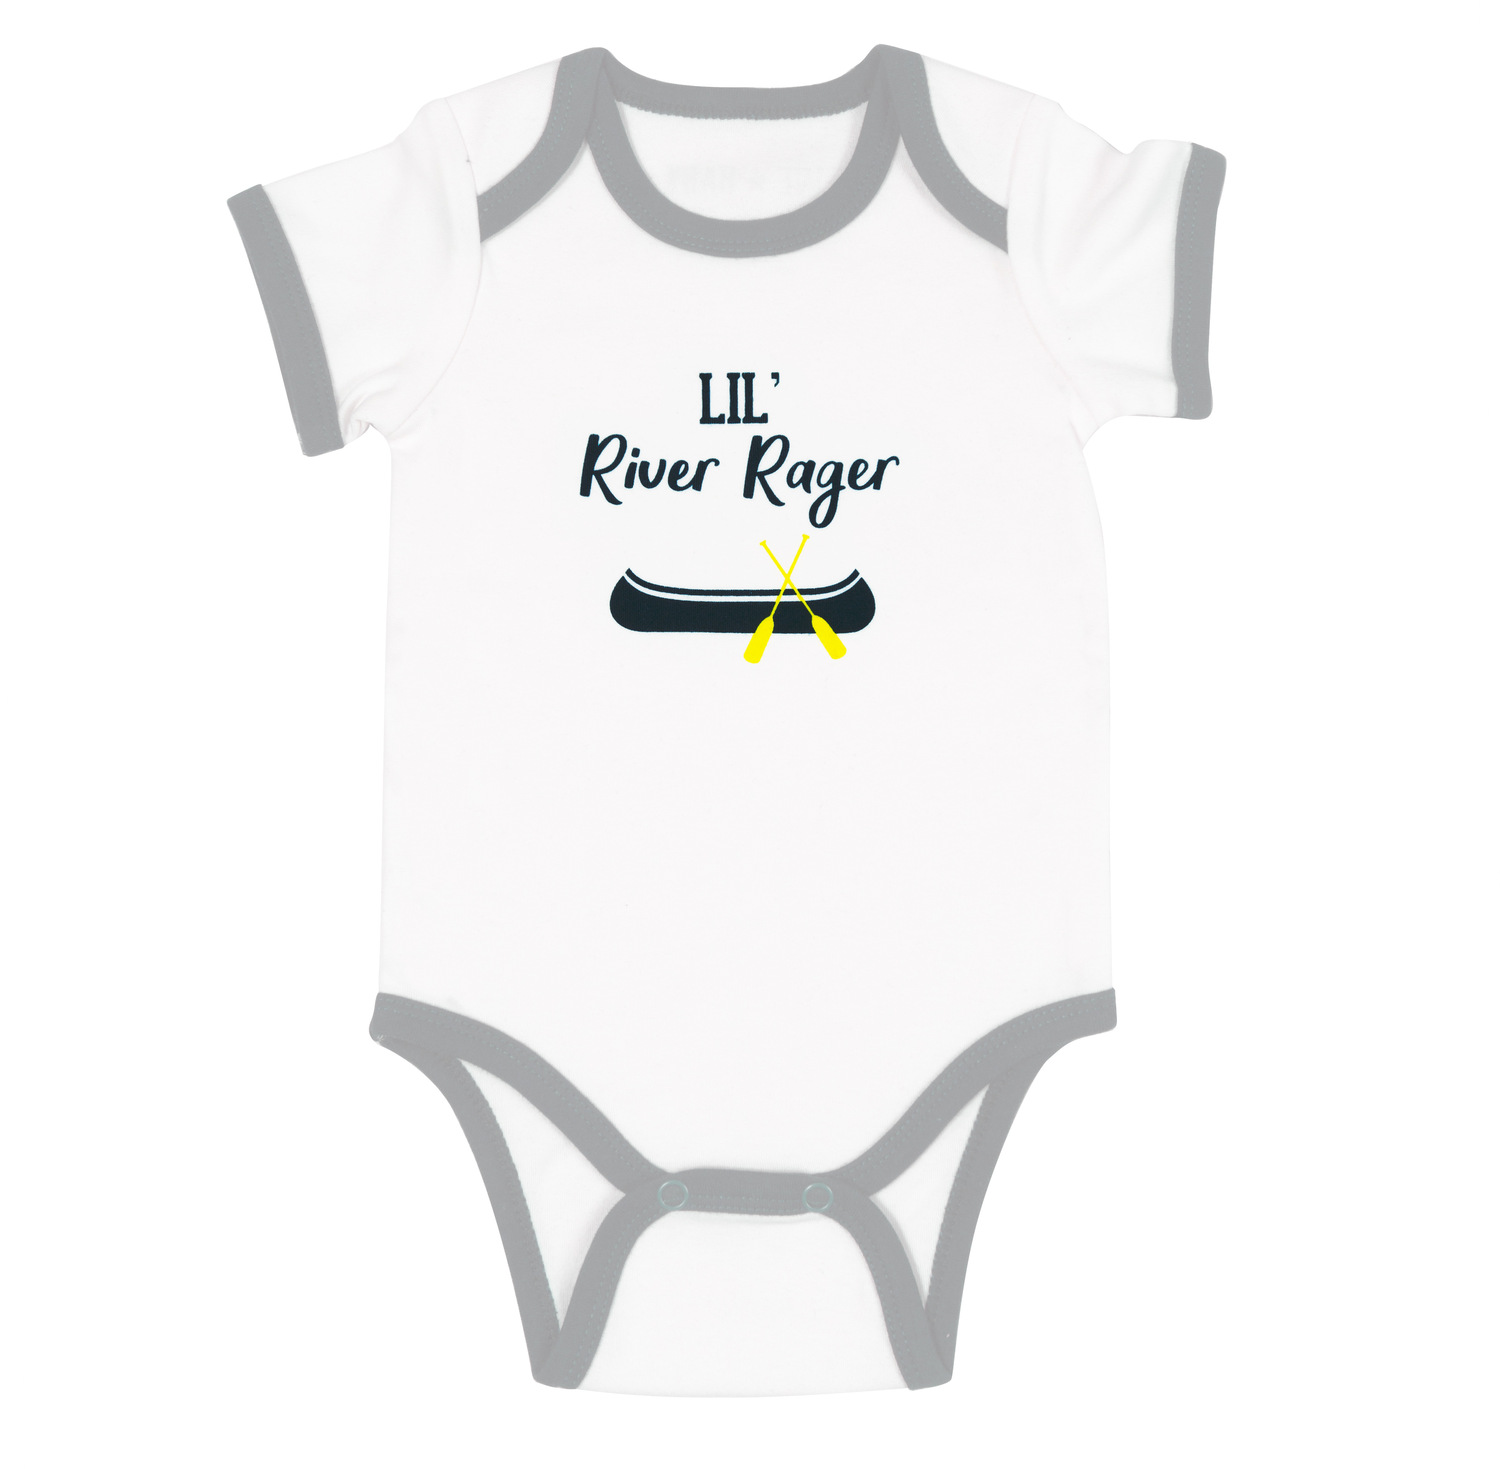 River Rager by We Baby - River Rager - 6-12 Months
Gray Trimmed Bodysuit